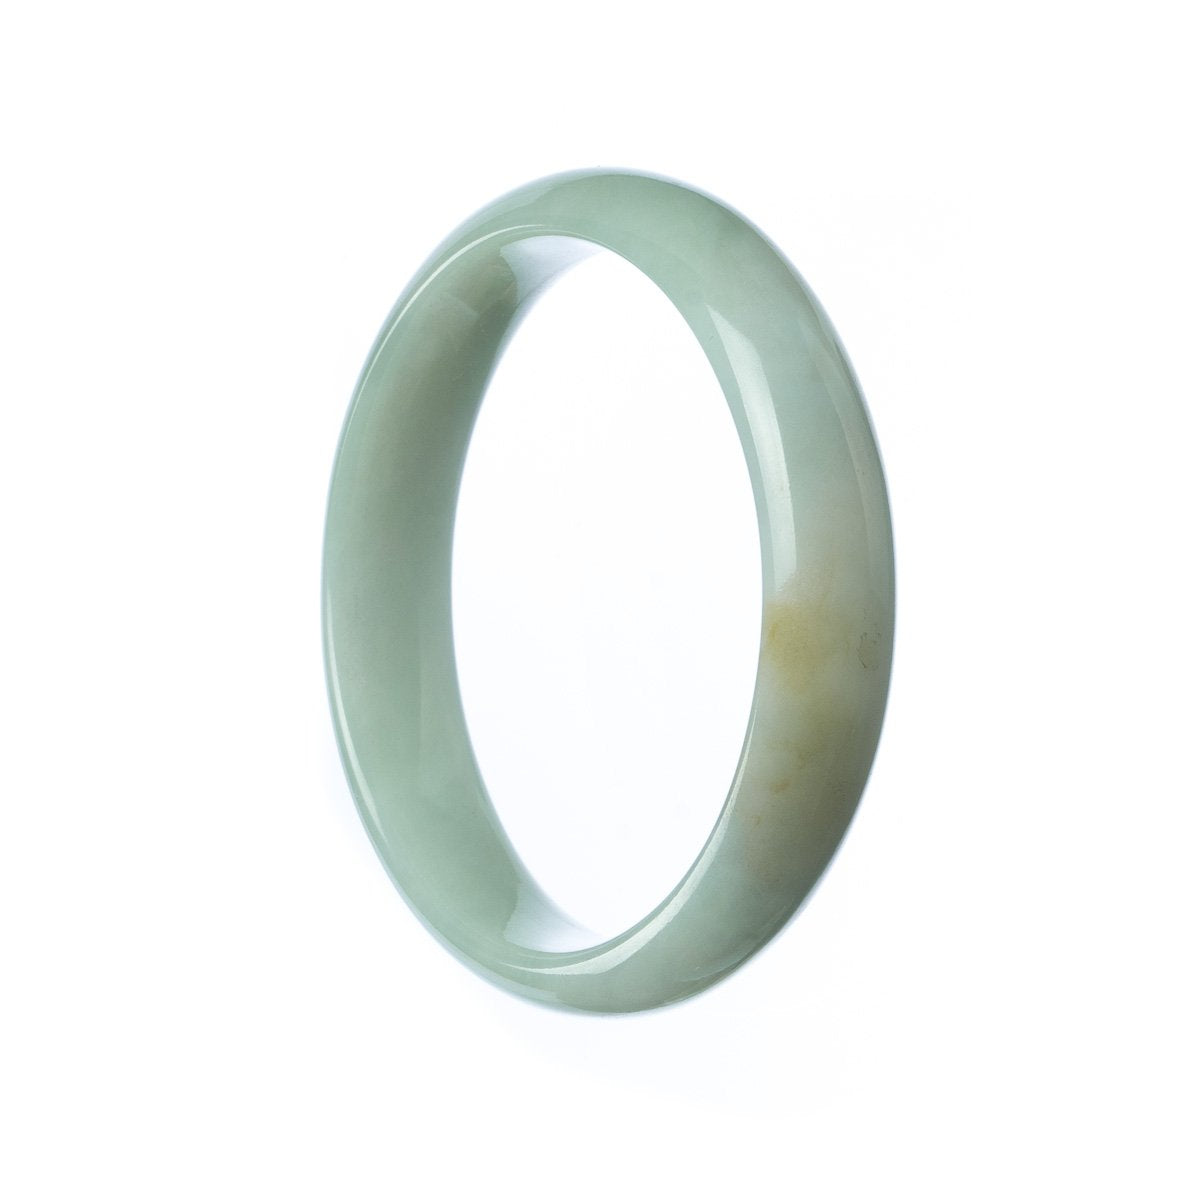 A pale green jade bangle bracelet with a half-moon design, measuring 54mm in size.